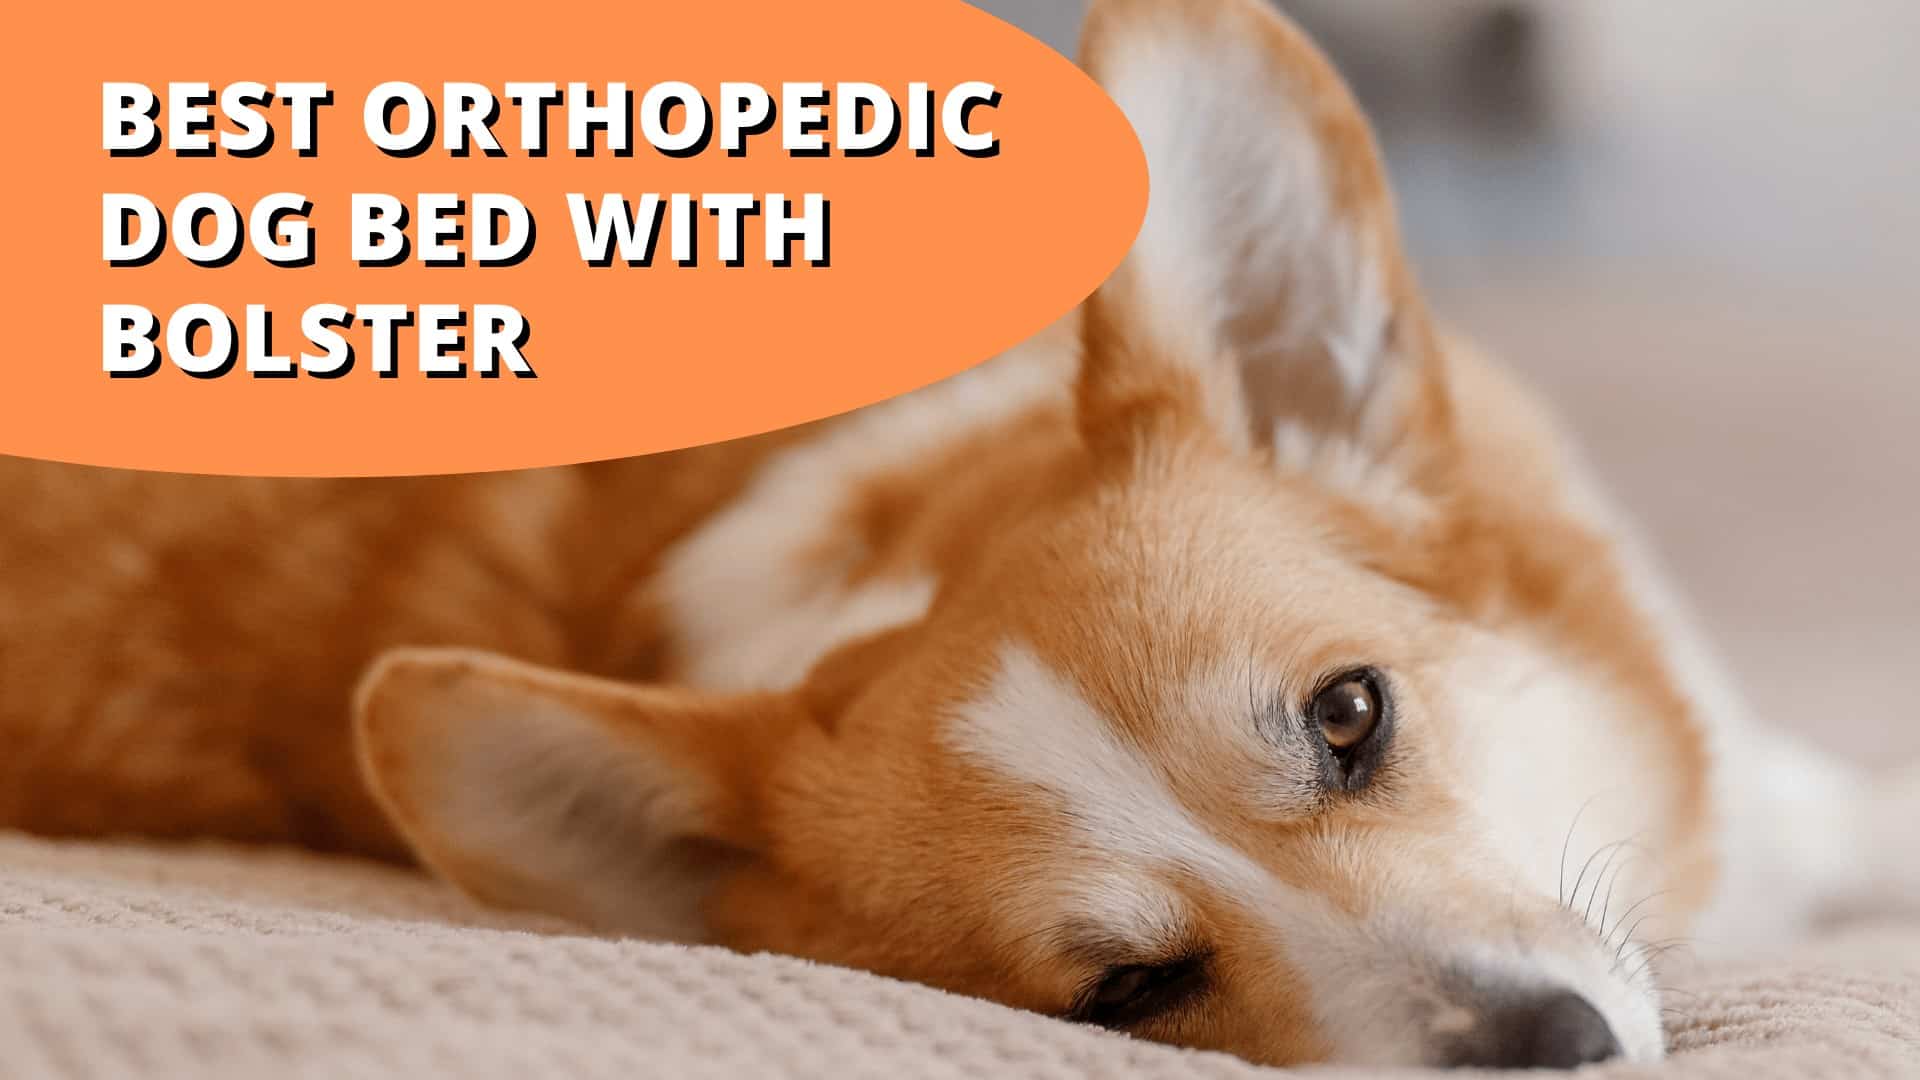 10 Best Orthopedic Dog Beds With A Bolster: Features & Benefits